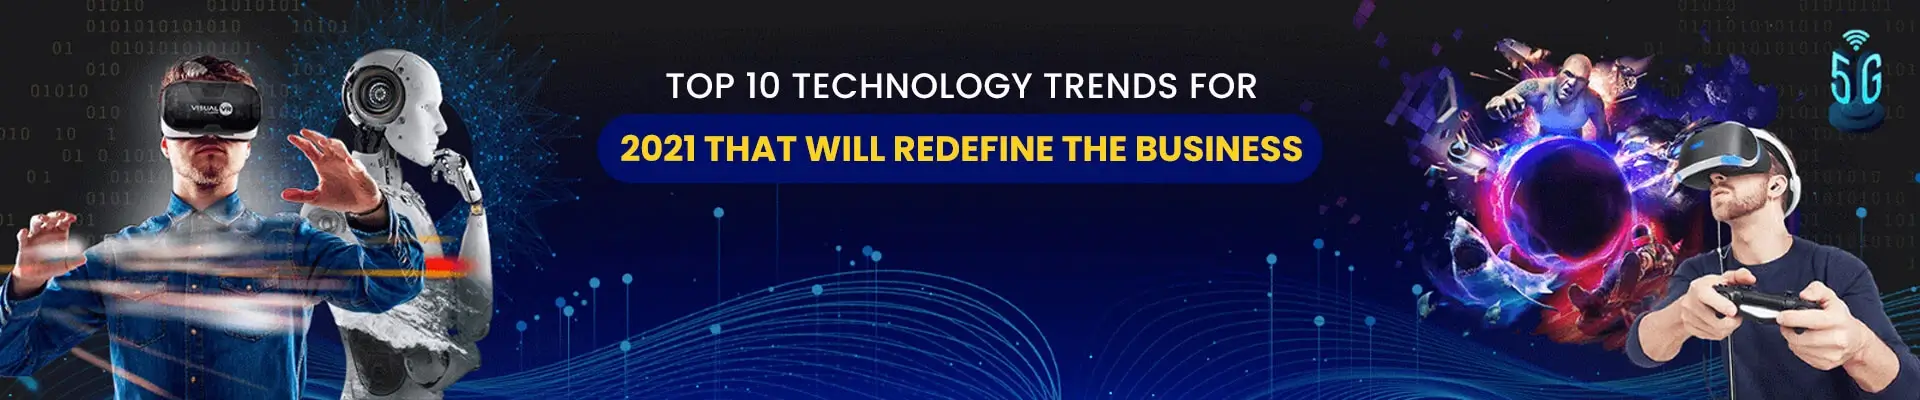 Top 10 Technology Trends For 2021 That Will Redefine The Business